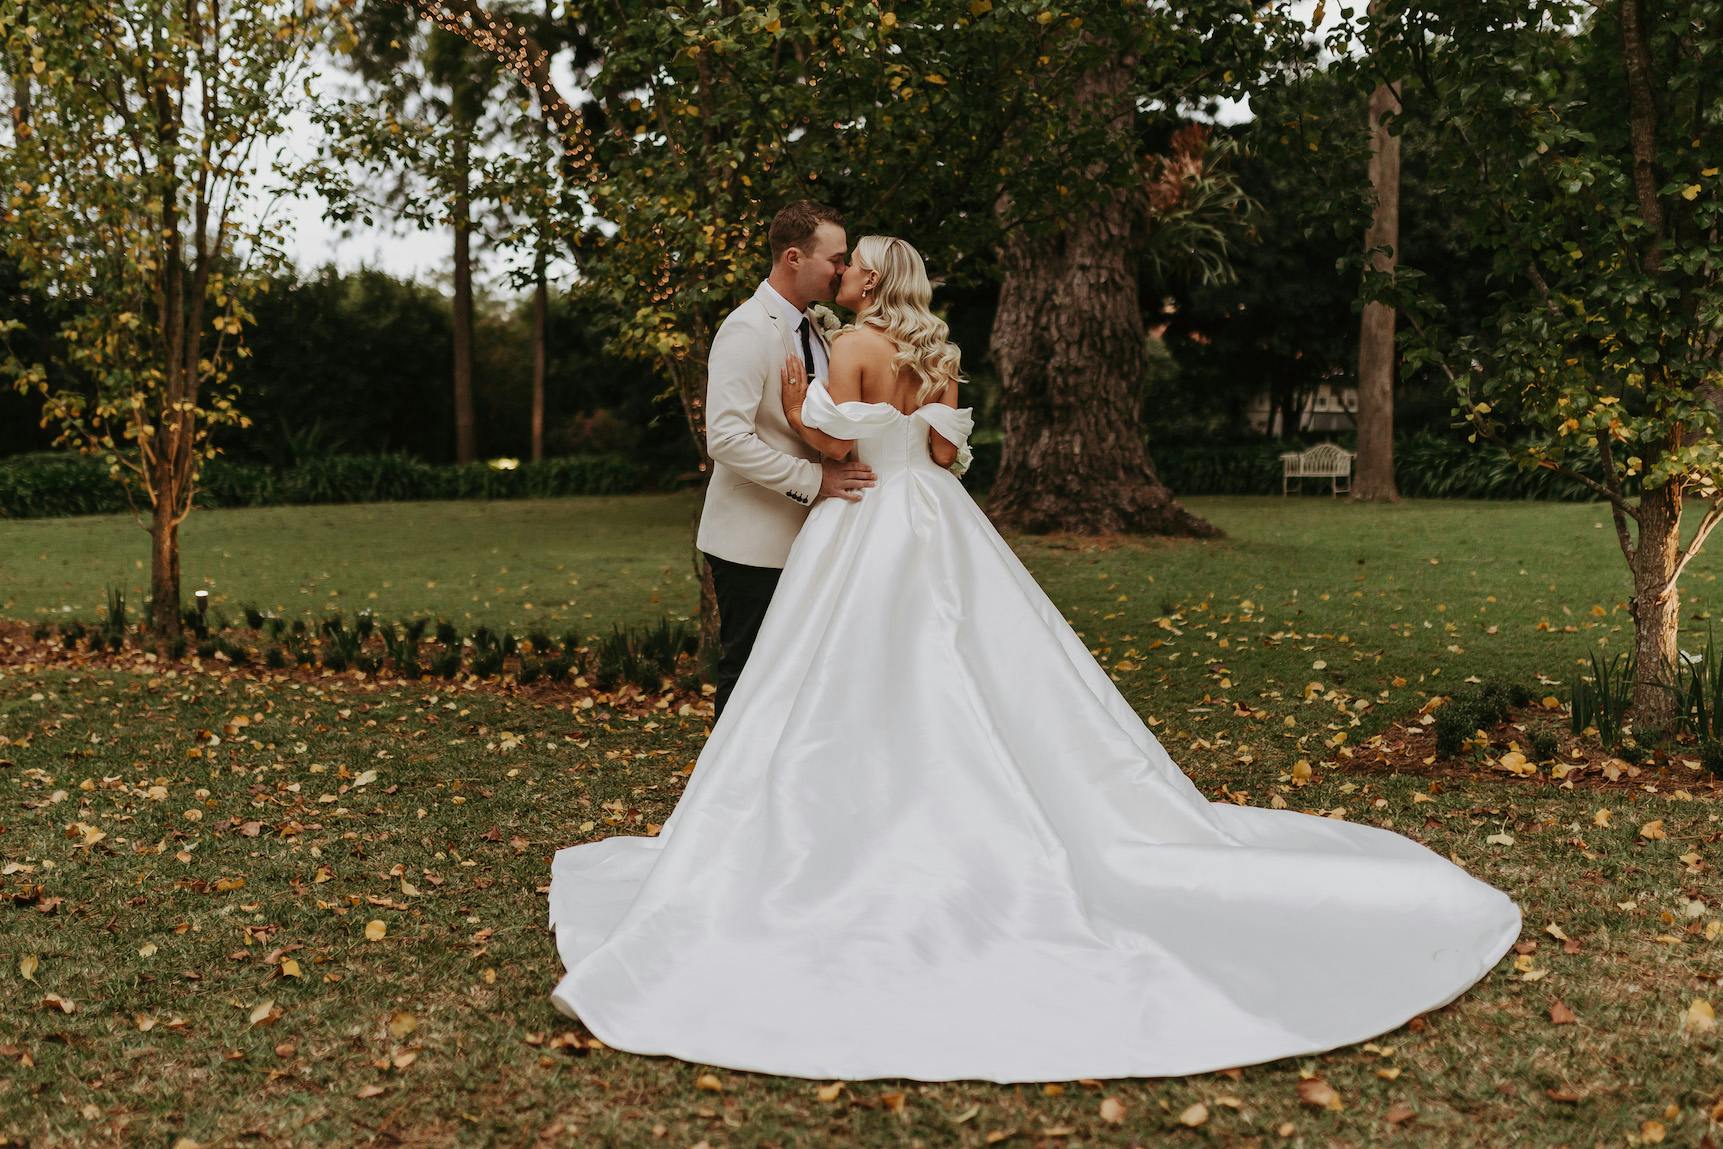 A bride and groom share a kiss outdoors in a lush garden. The bride wears a flowing white gown with a long train, and the groom is dressed in a white dinner jacket and black pants. They stand on grass with trees and foliage around them.